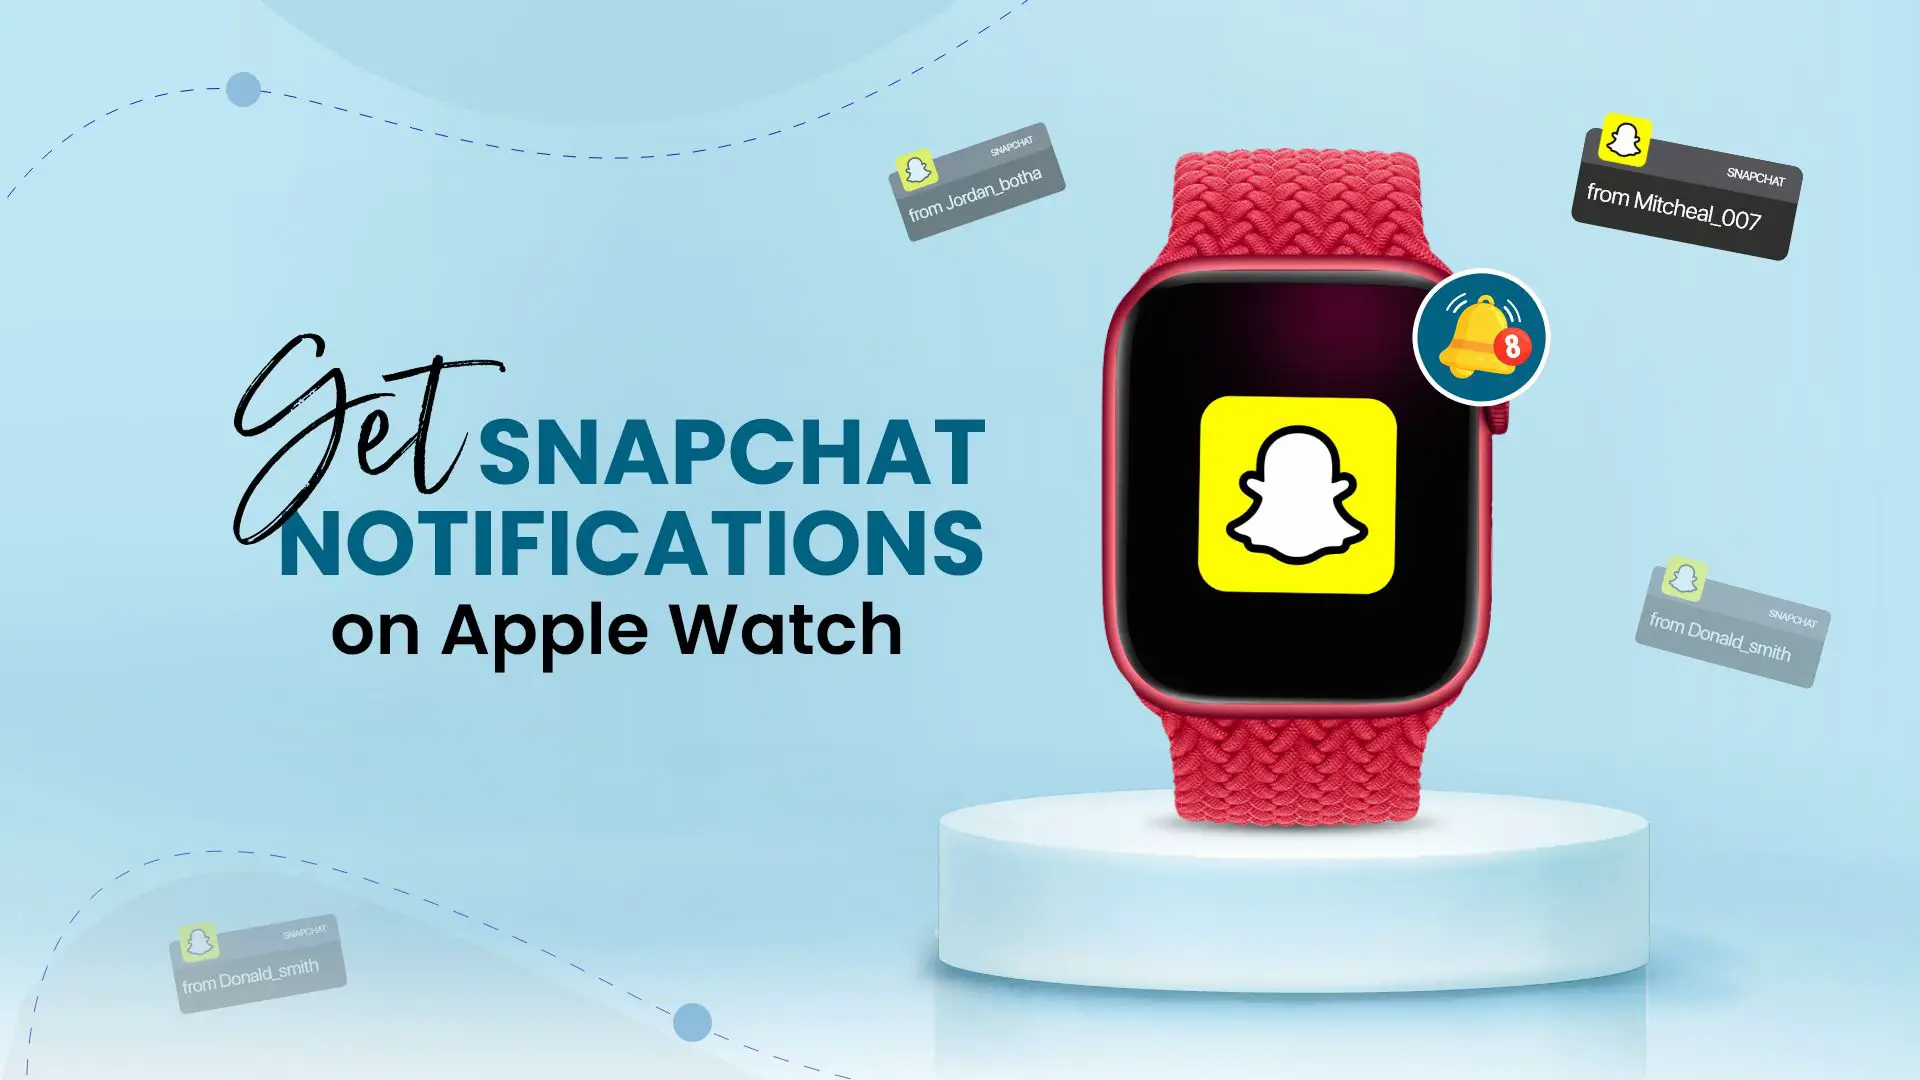 How to Get Snapchat Notifications on Apple Watch